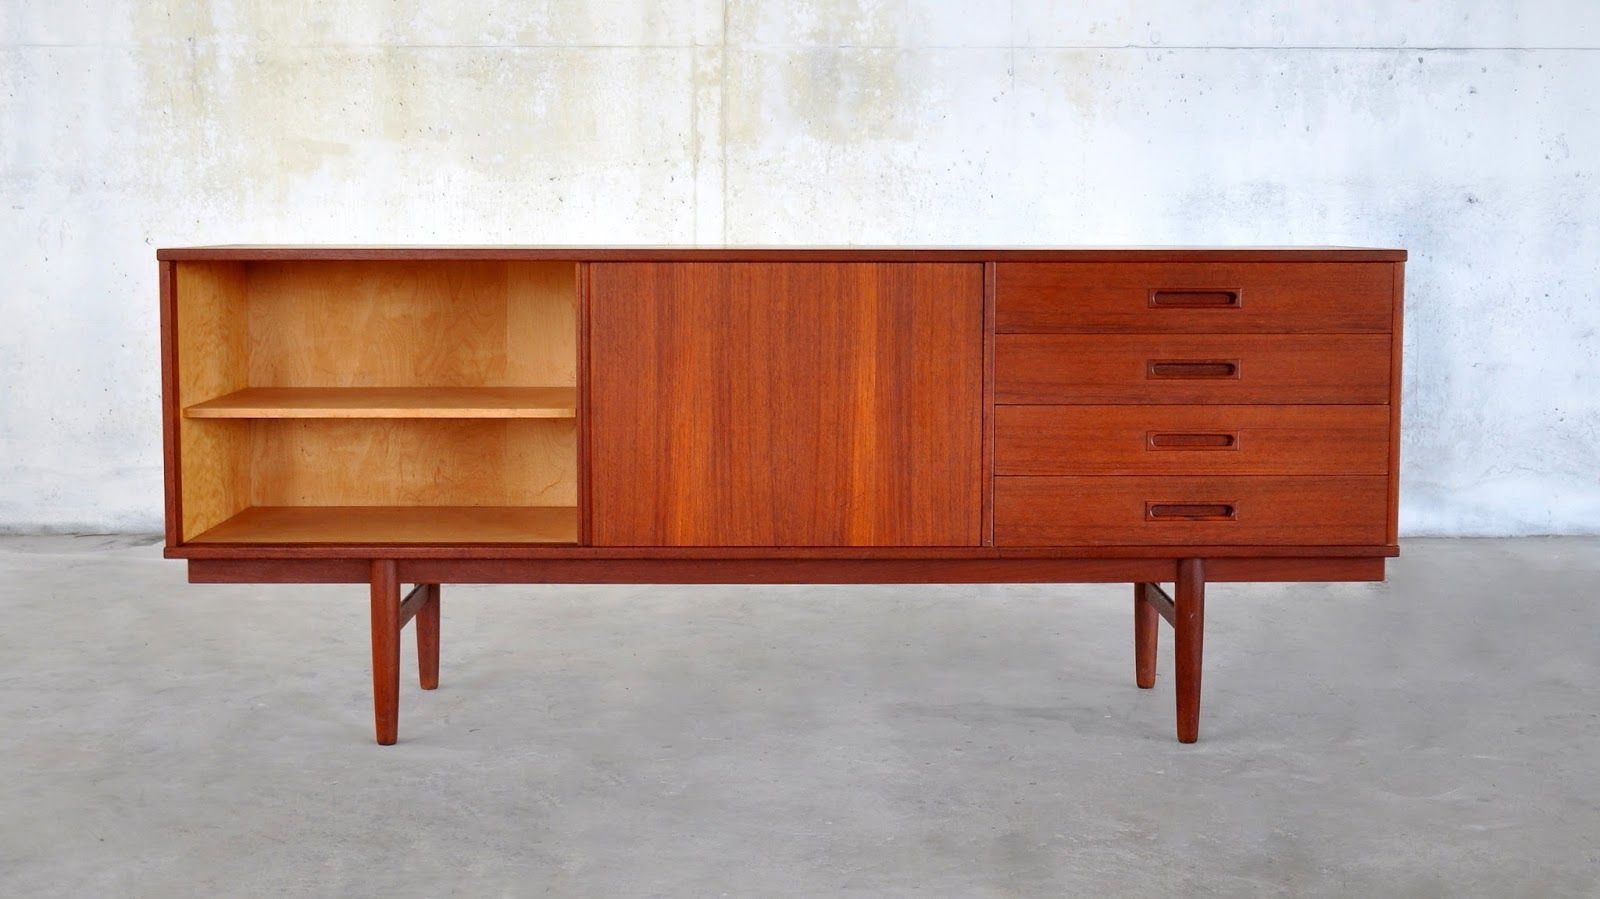 Widely Used Contemporary Sideboards In Select Modern: Danish Modern Teak Credenza, Buffet, Sideboard Or Bar (View 6 of 11)